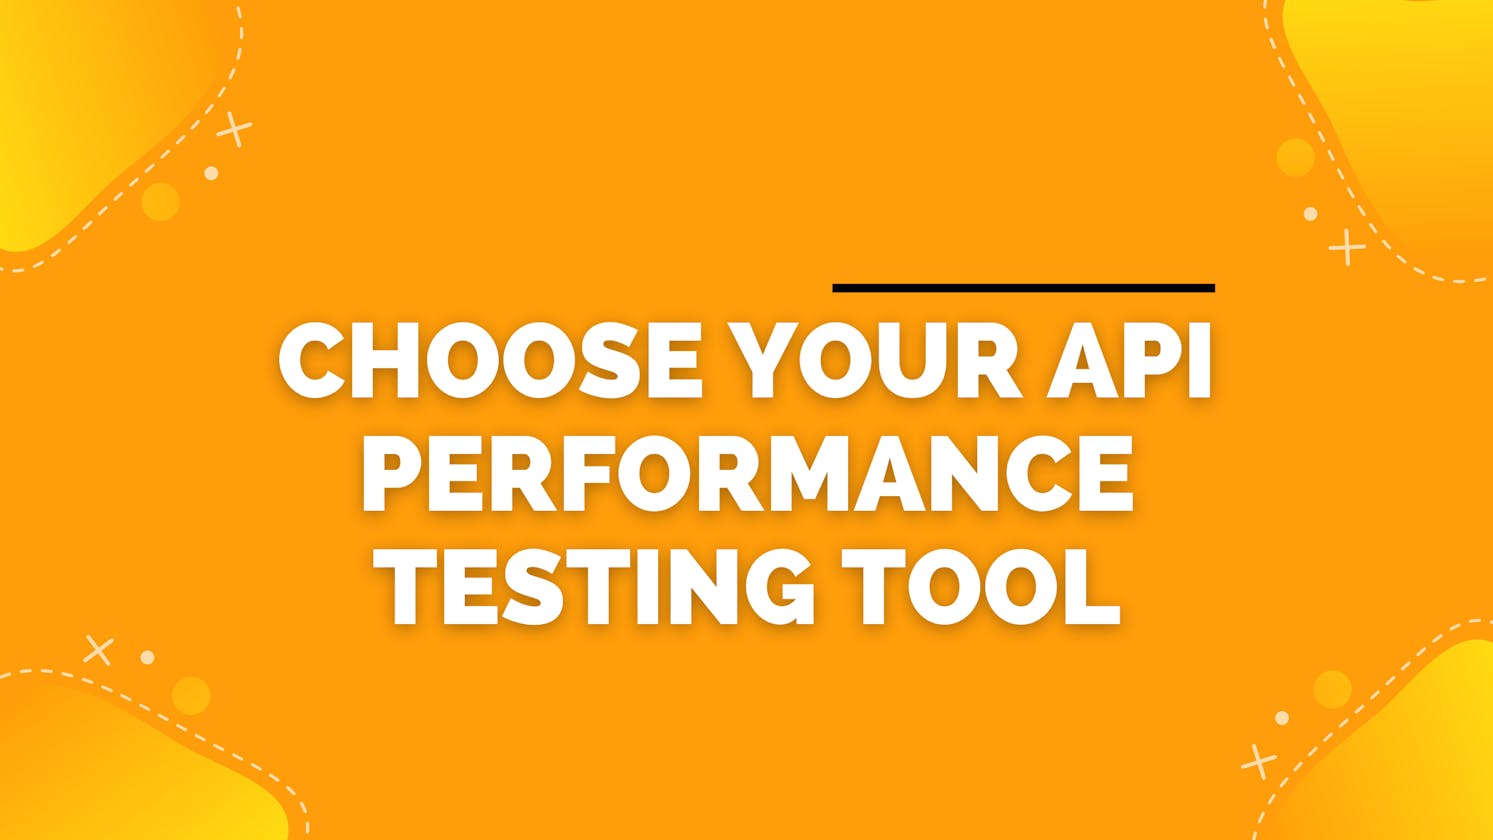 How to choose your API Performance testing tool - A guide for different use cases